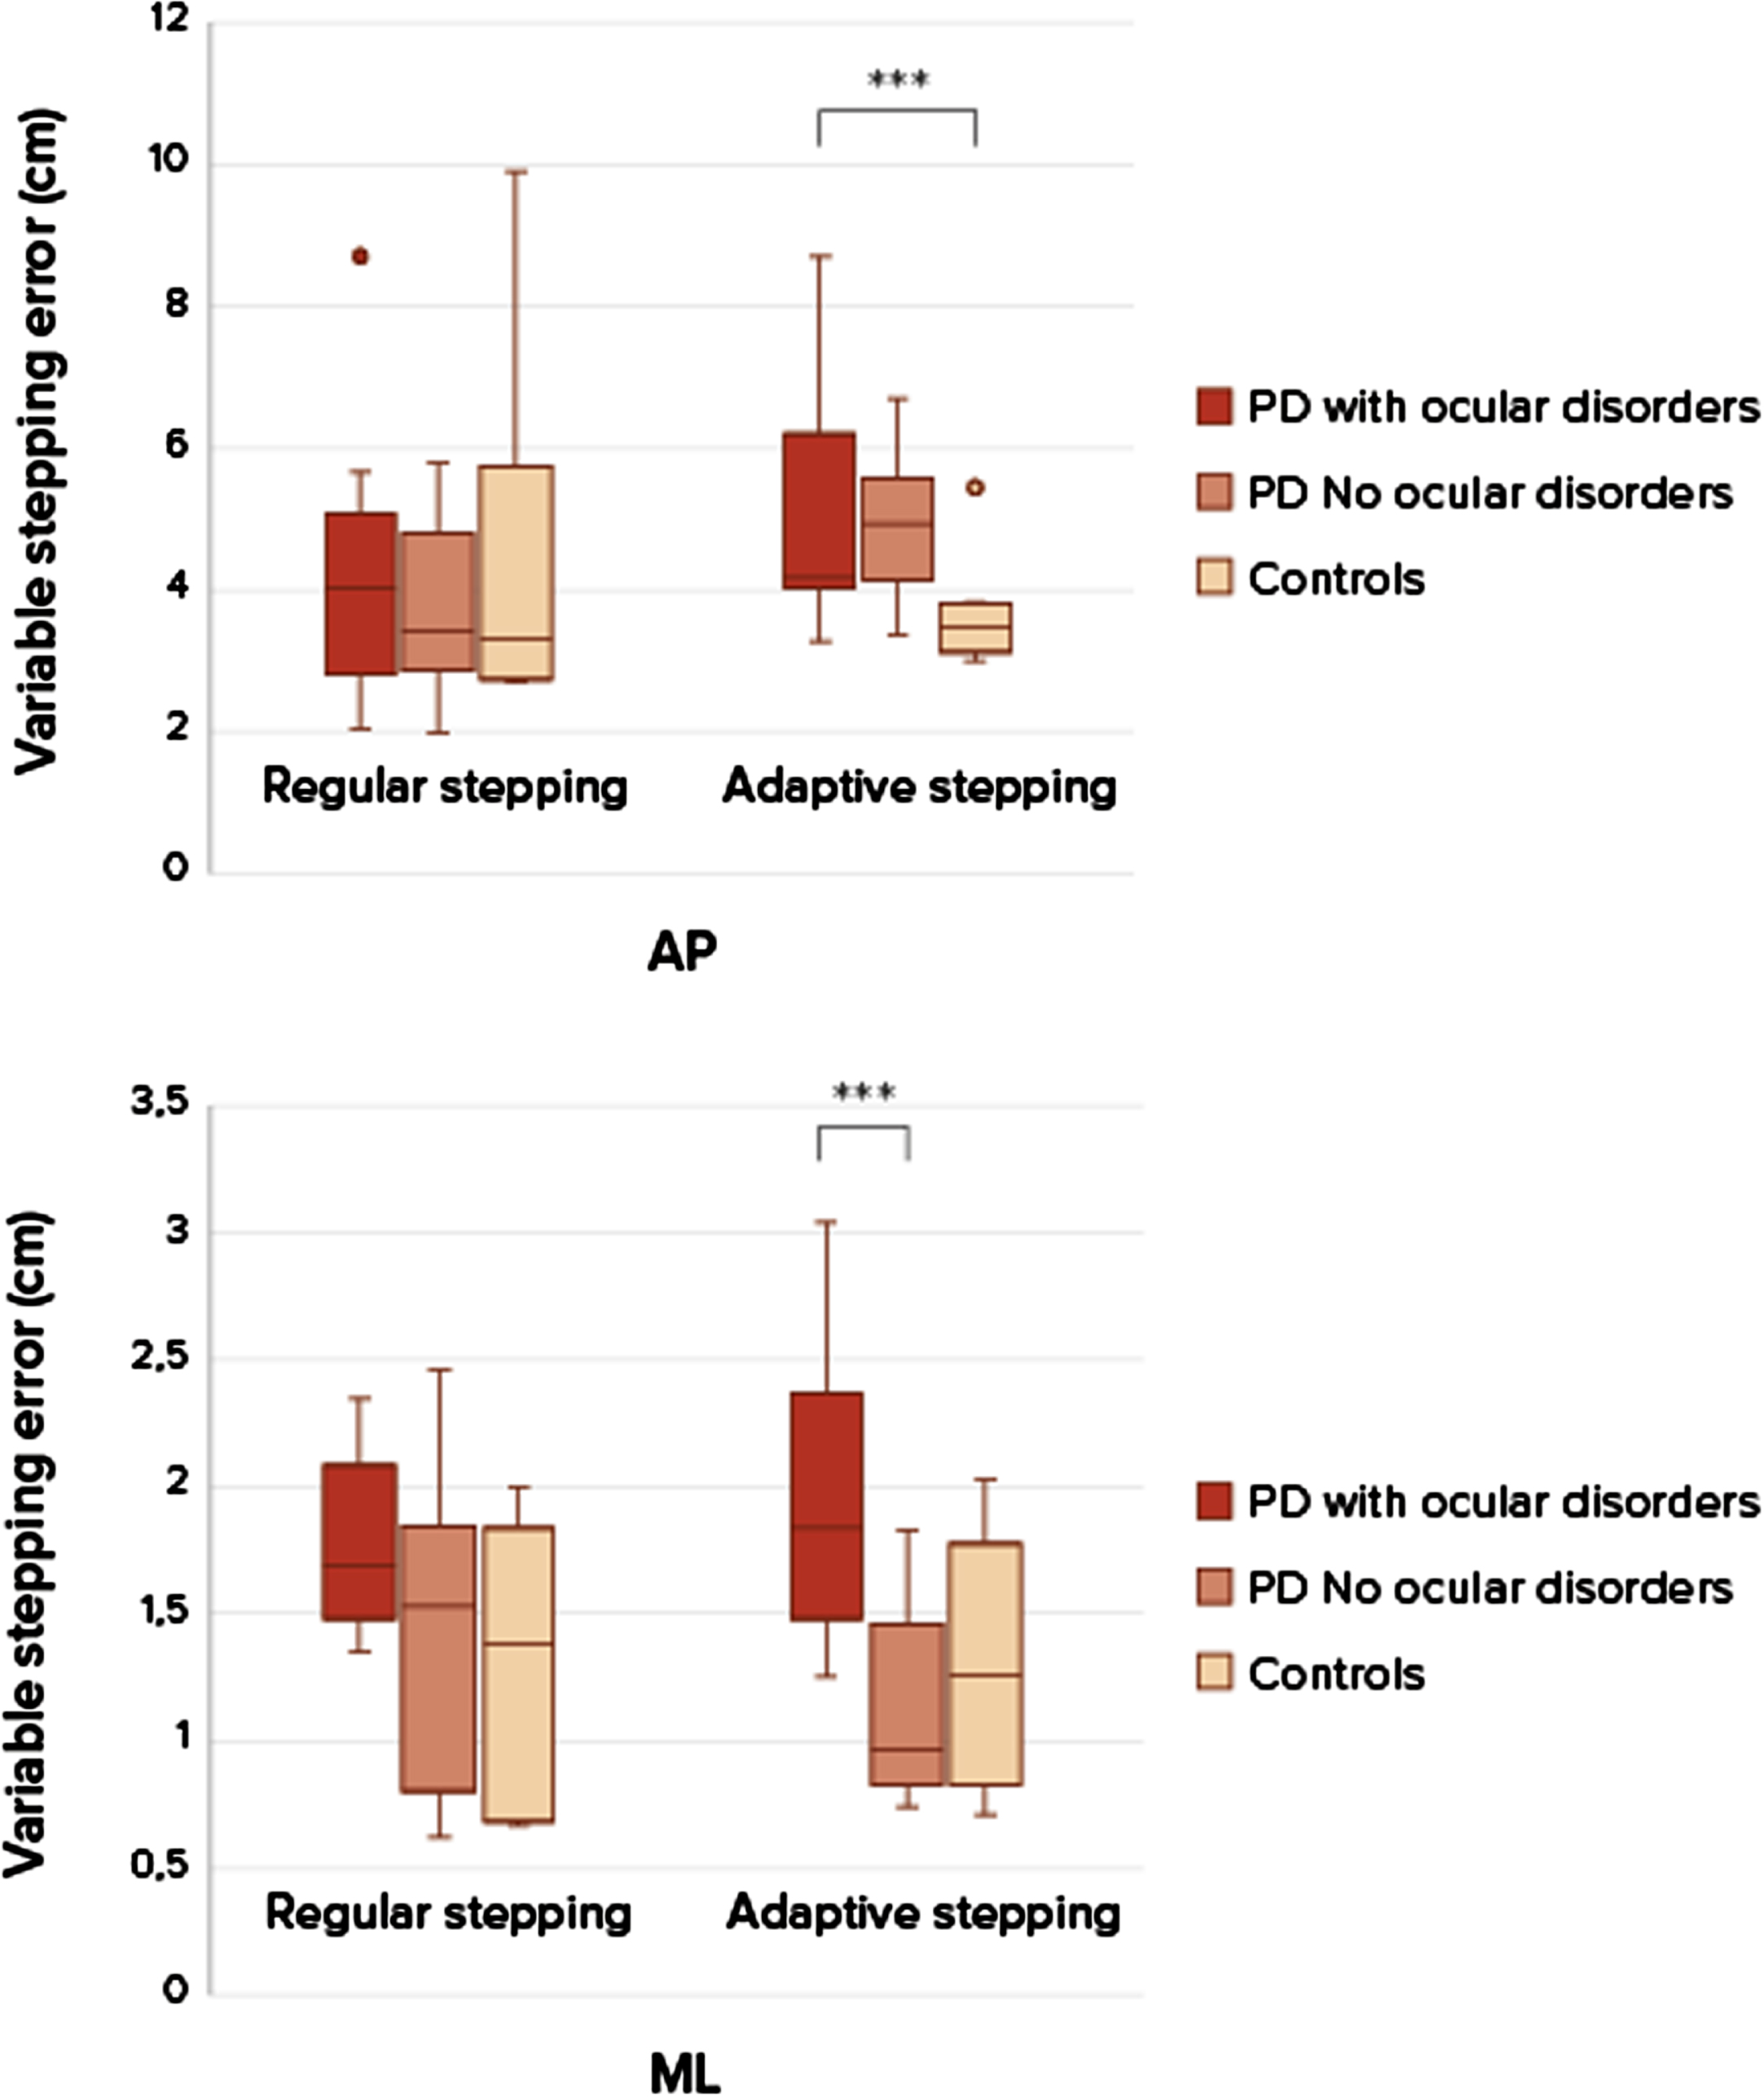 Boxplots of stepping accuracy between patients with ocular disorders, without ocular disorders and healthy controls. Differences in stepping accuracy (mean SD anterior-posterior (AP) and medio-lateral (ML) between regular stepping and an adaptive stepping compared between two groups patient with PD and healthy controls, at self-selected walking speeds. A p-value of p < 0.05 was considered as significant. Only significant differences are addressed with ***.***Significant difference between groups, PD compared to controls during adaptive stepping in the anterior-posterior direction. ***Significant difference between groups PD with ocular disorders and PD without ocular disorders in the medio-lateral direction.